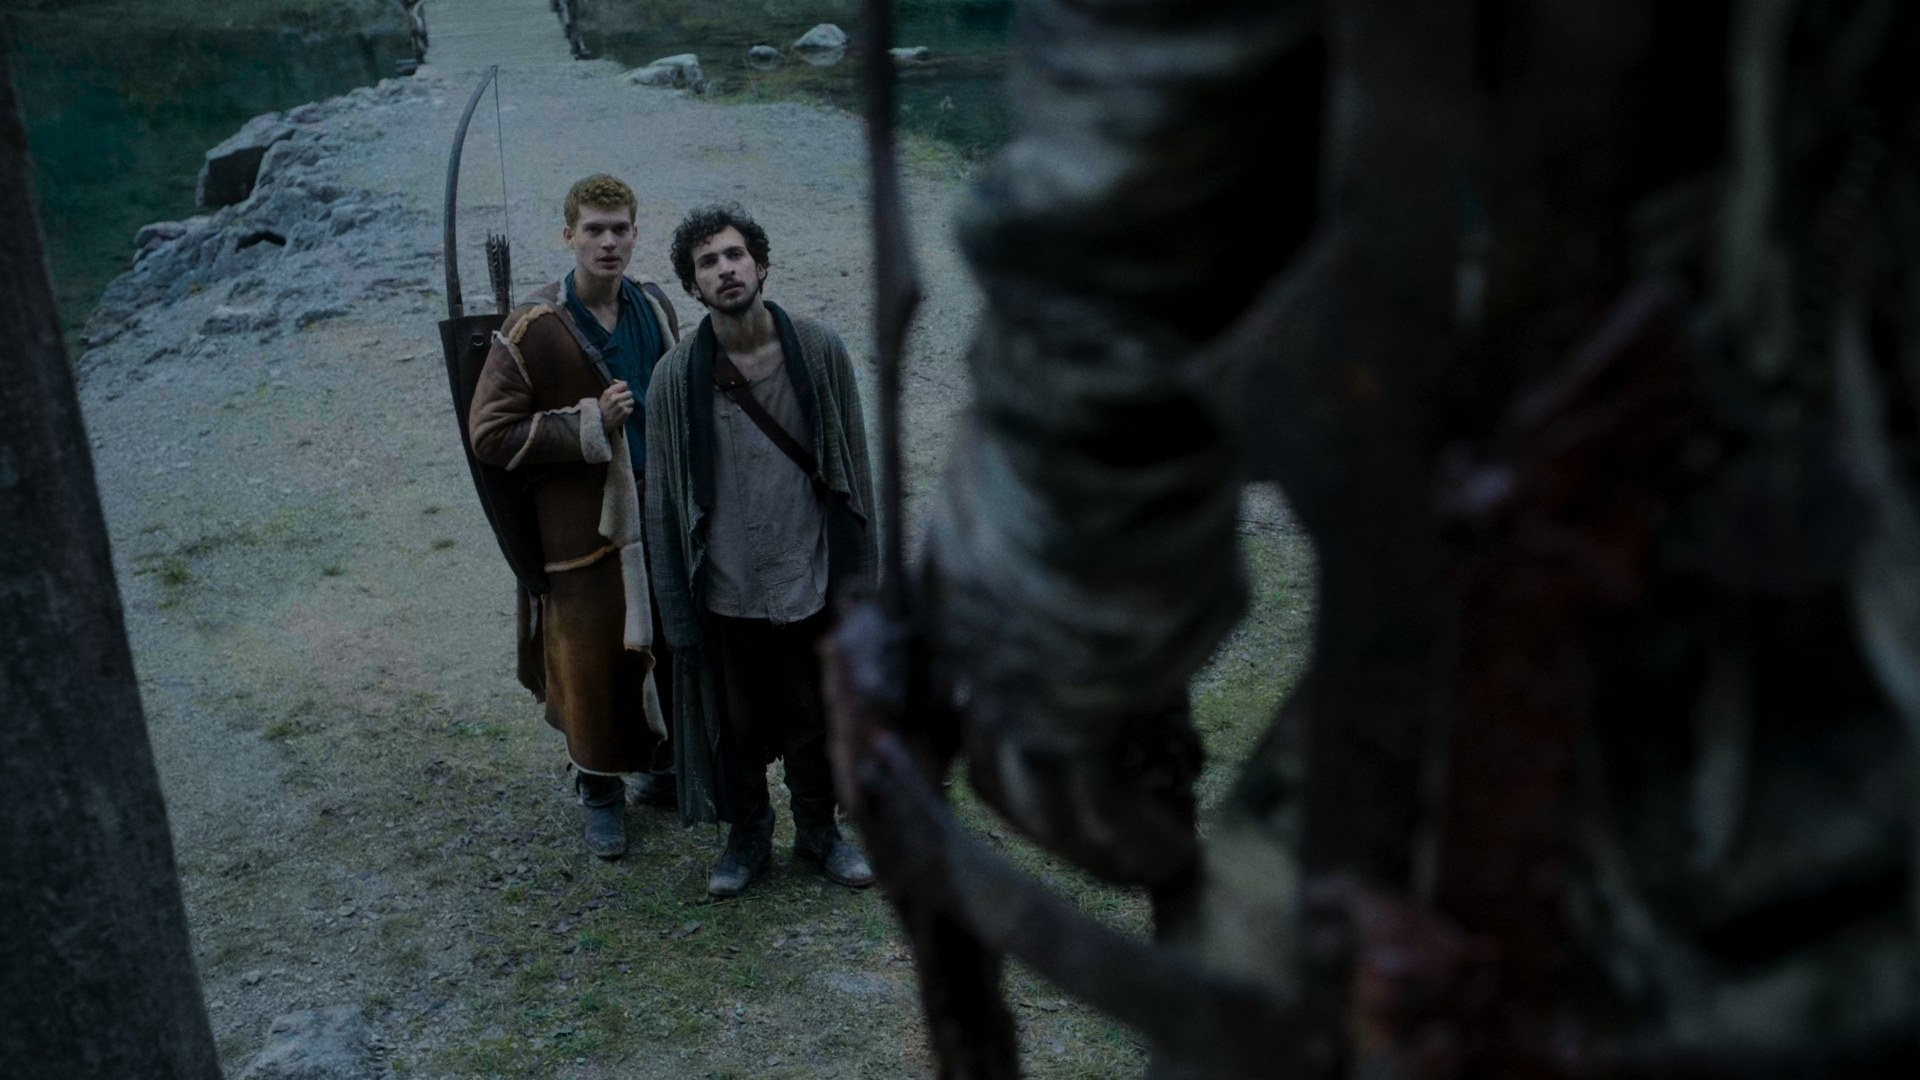 A shot of Rand and Mat as they look upon the caged dead man. Rand, in a long sheepskin coat and carrying an arrow and quiver, is muttering something to Mat, who is wearing colourless, threadbare clothes.